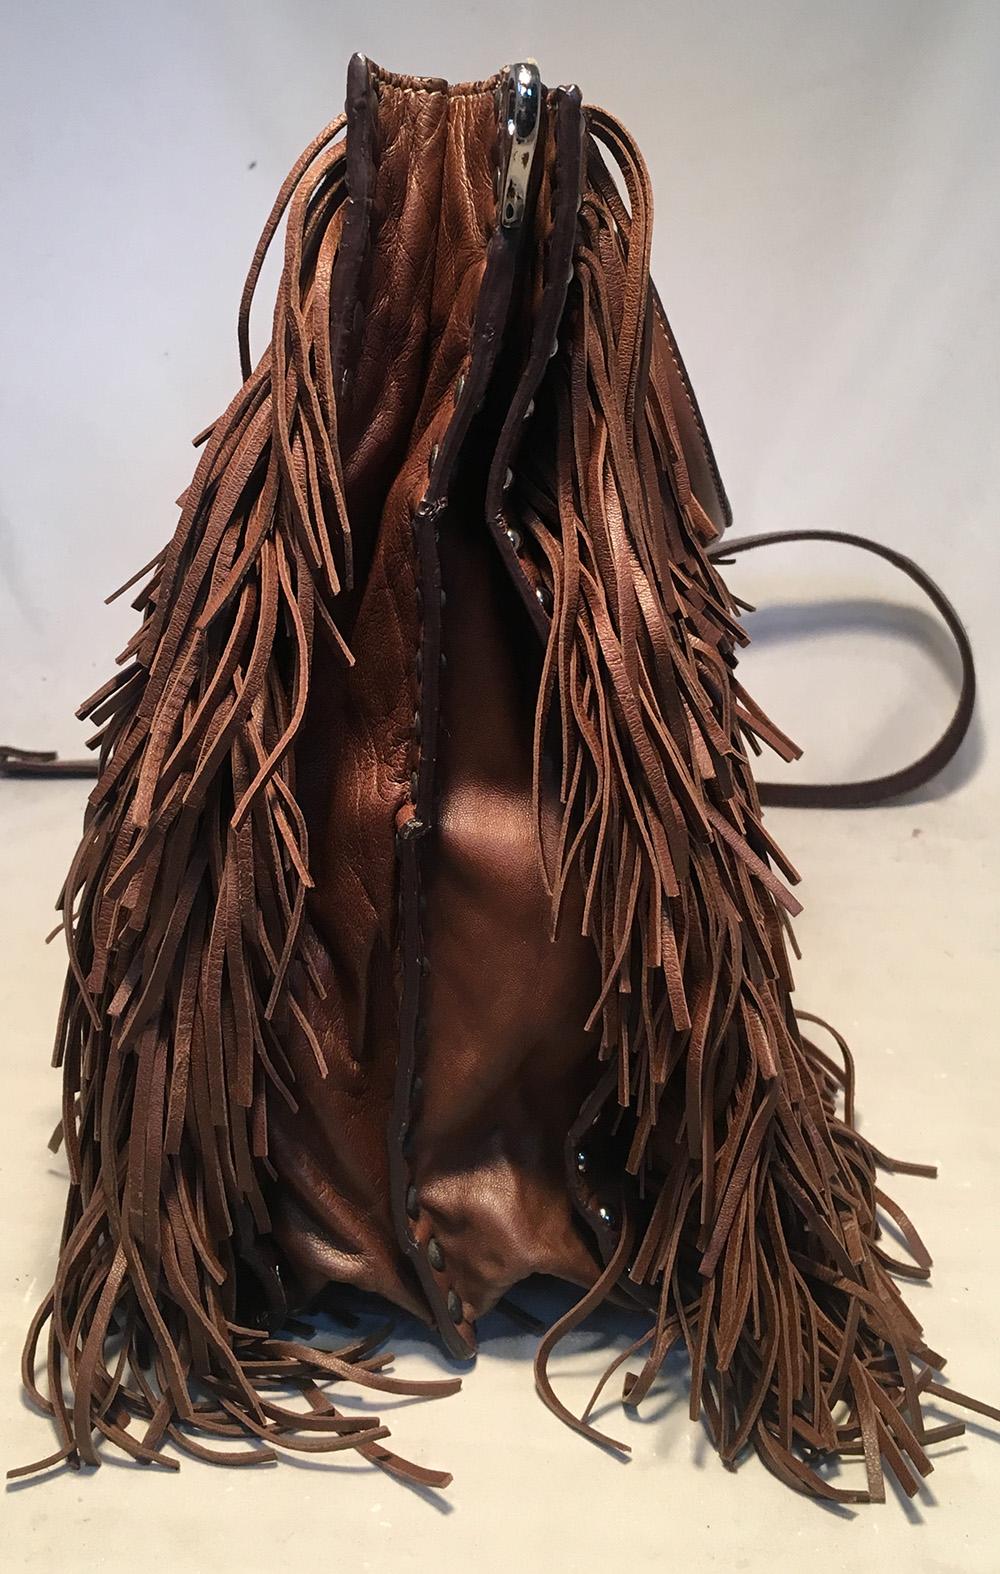 PRADA Noce Nappa Brown Leather Fringe Tote Bag in excellent condition. Soft and supple brown leather fringe exterior trimmed with silver hardware and studs along edges. Top handles for easy carrying and removable shoulder strap to easily convert